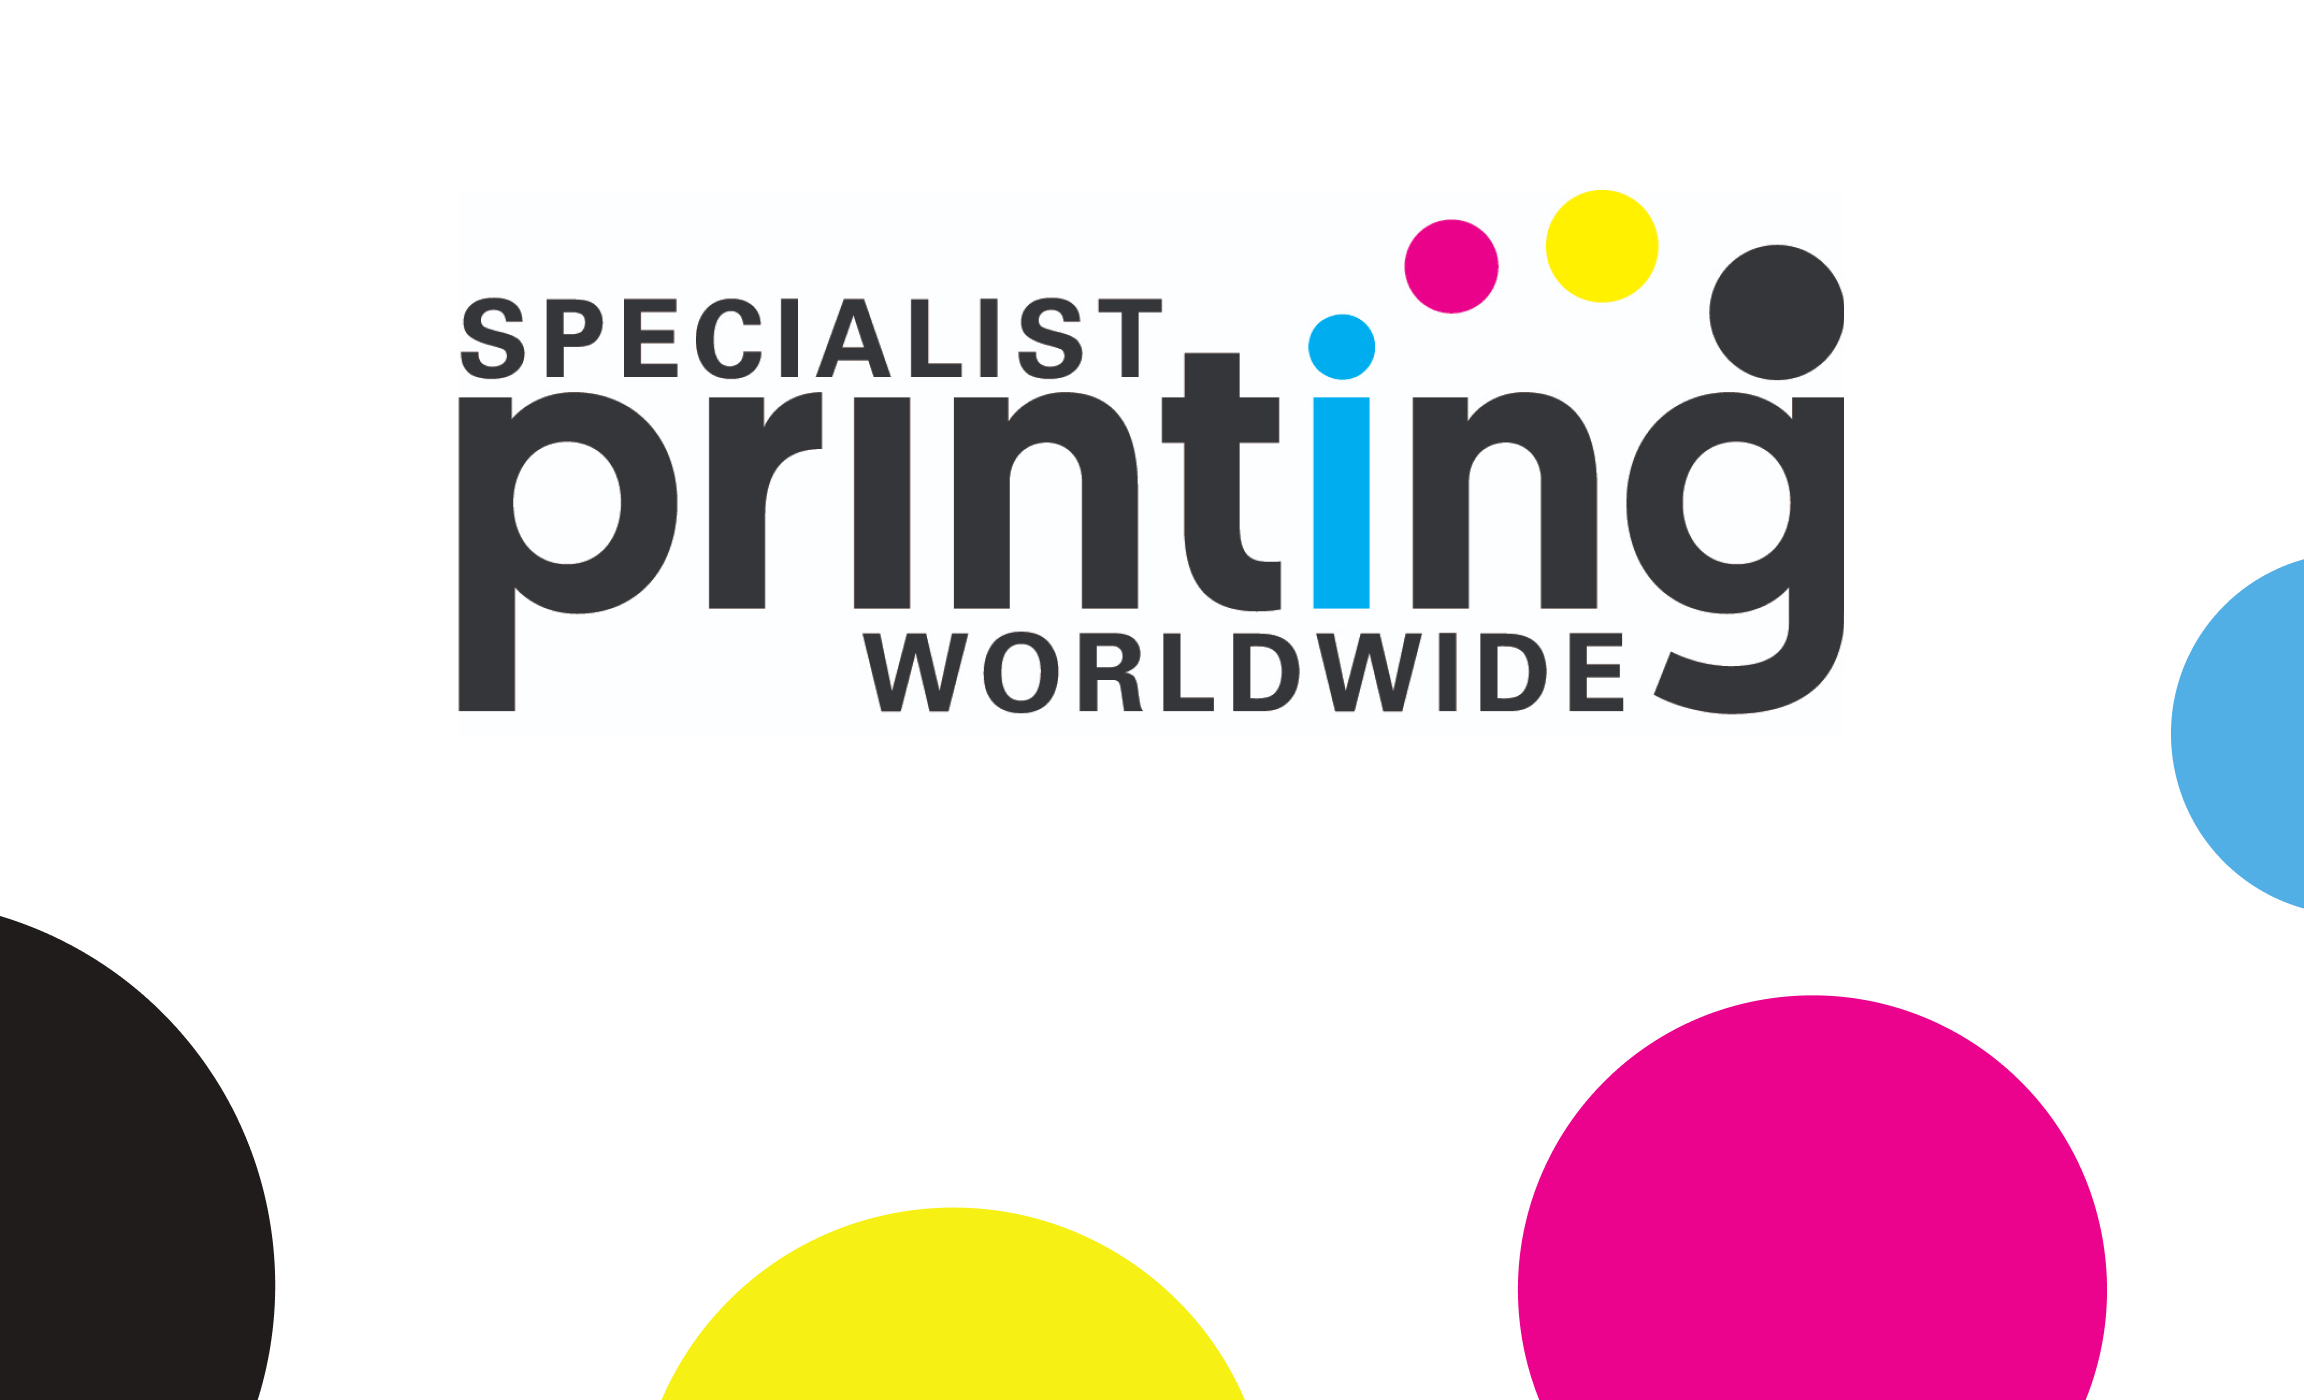 ansvar isolation Stolpe Specialist Printing Worldwide | Specialist Printing Worldwide